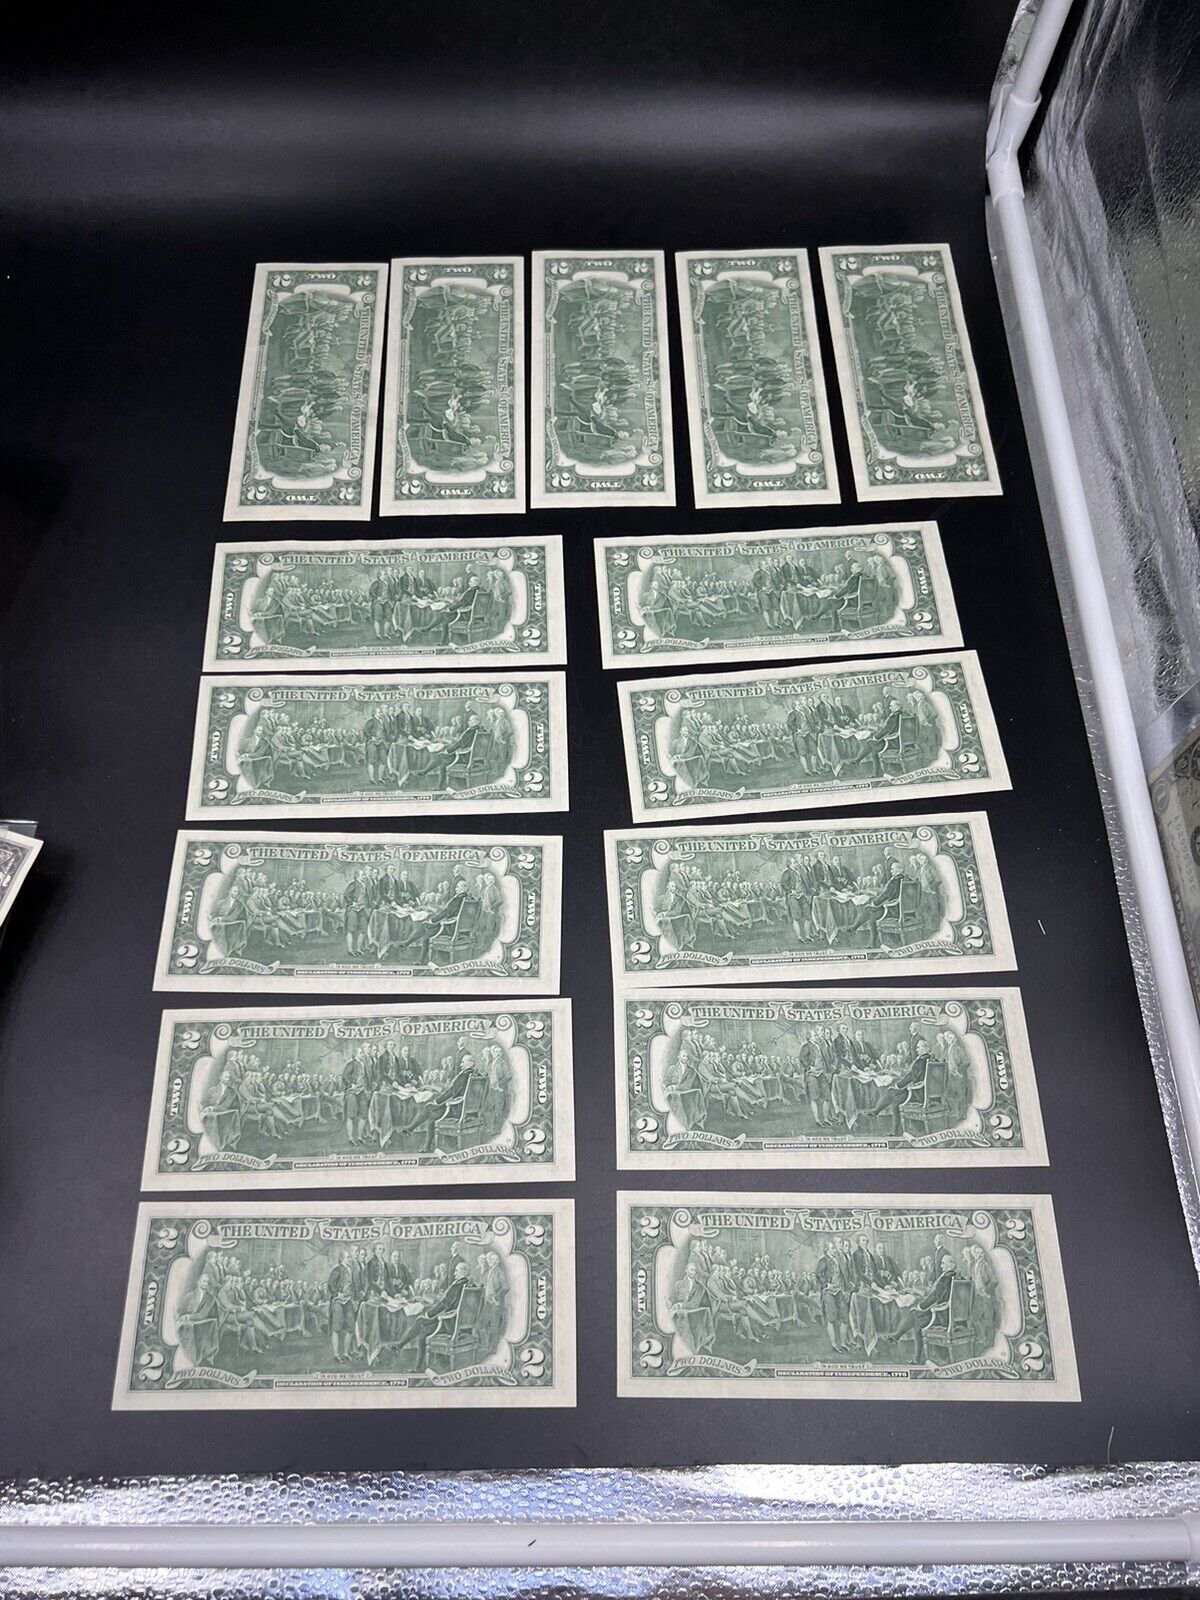 15 Consecutive 1976 $2 UNC Bicentennial Two Dollar Bills FRN Stamped for Postal